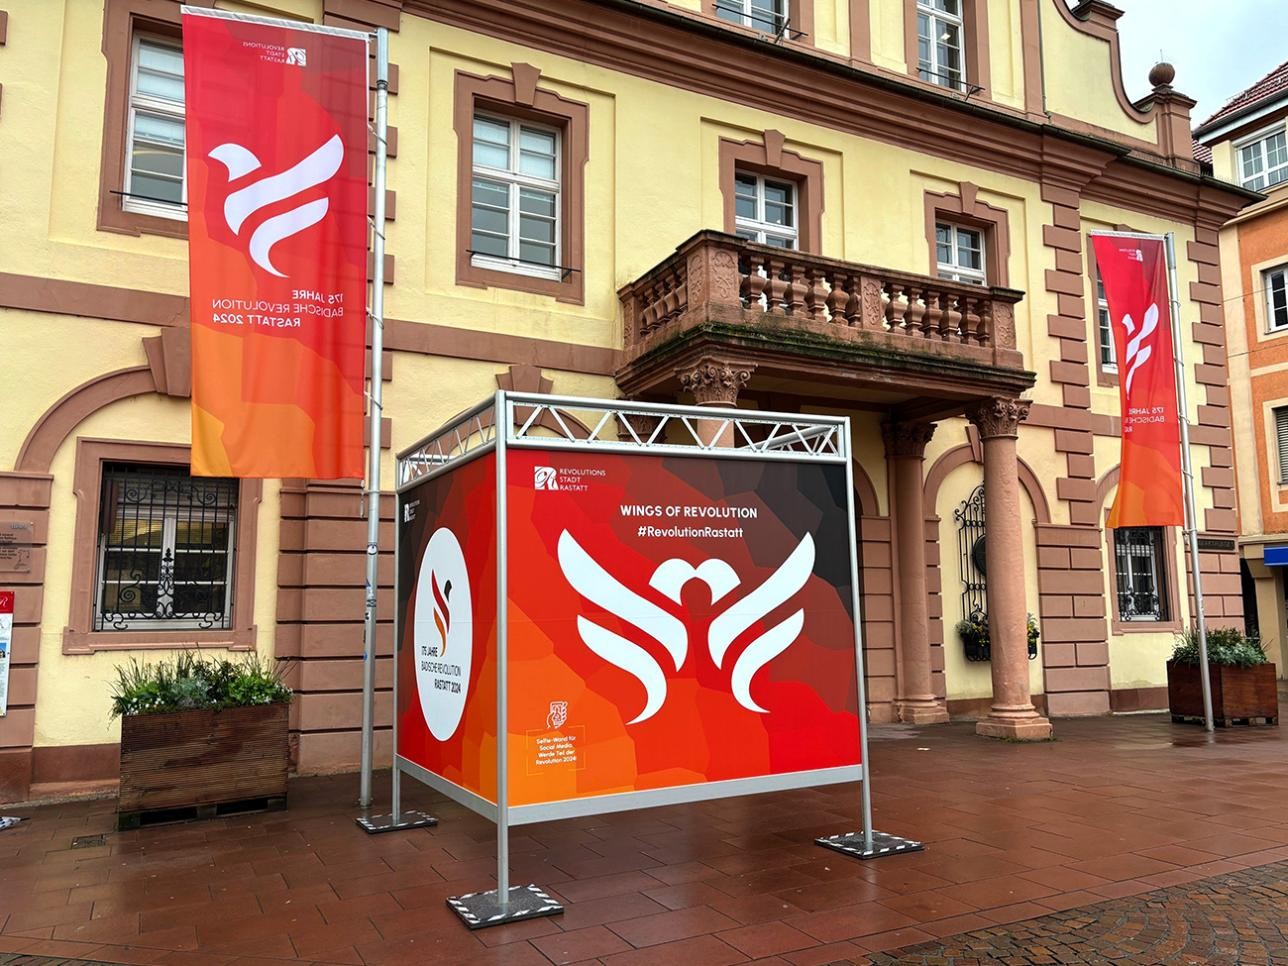 Information cube in front of the historic town hall in Rastatt